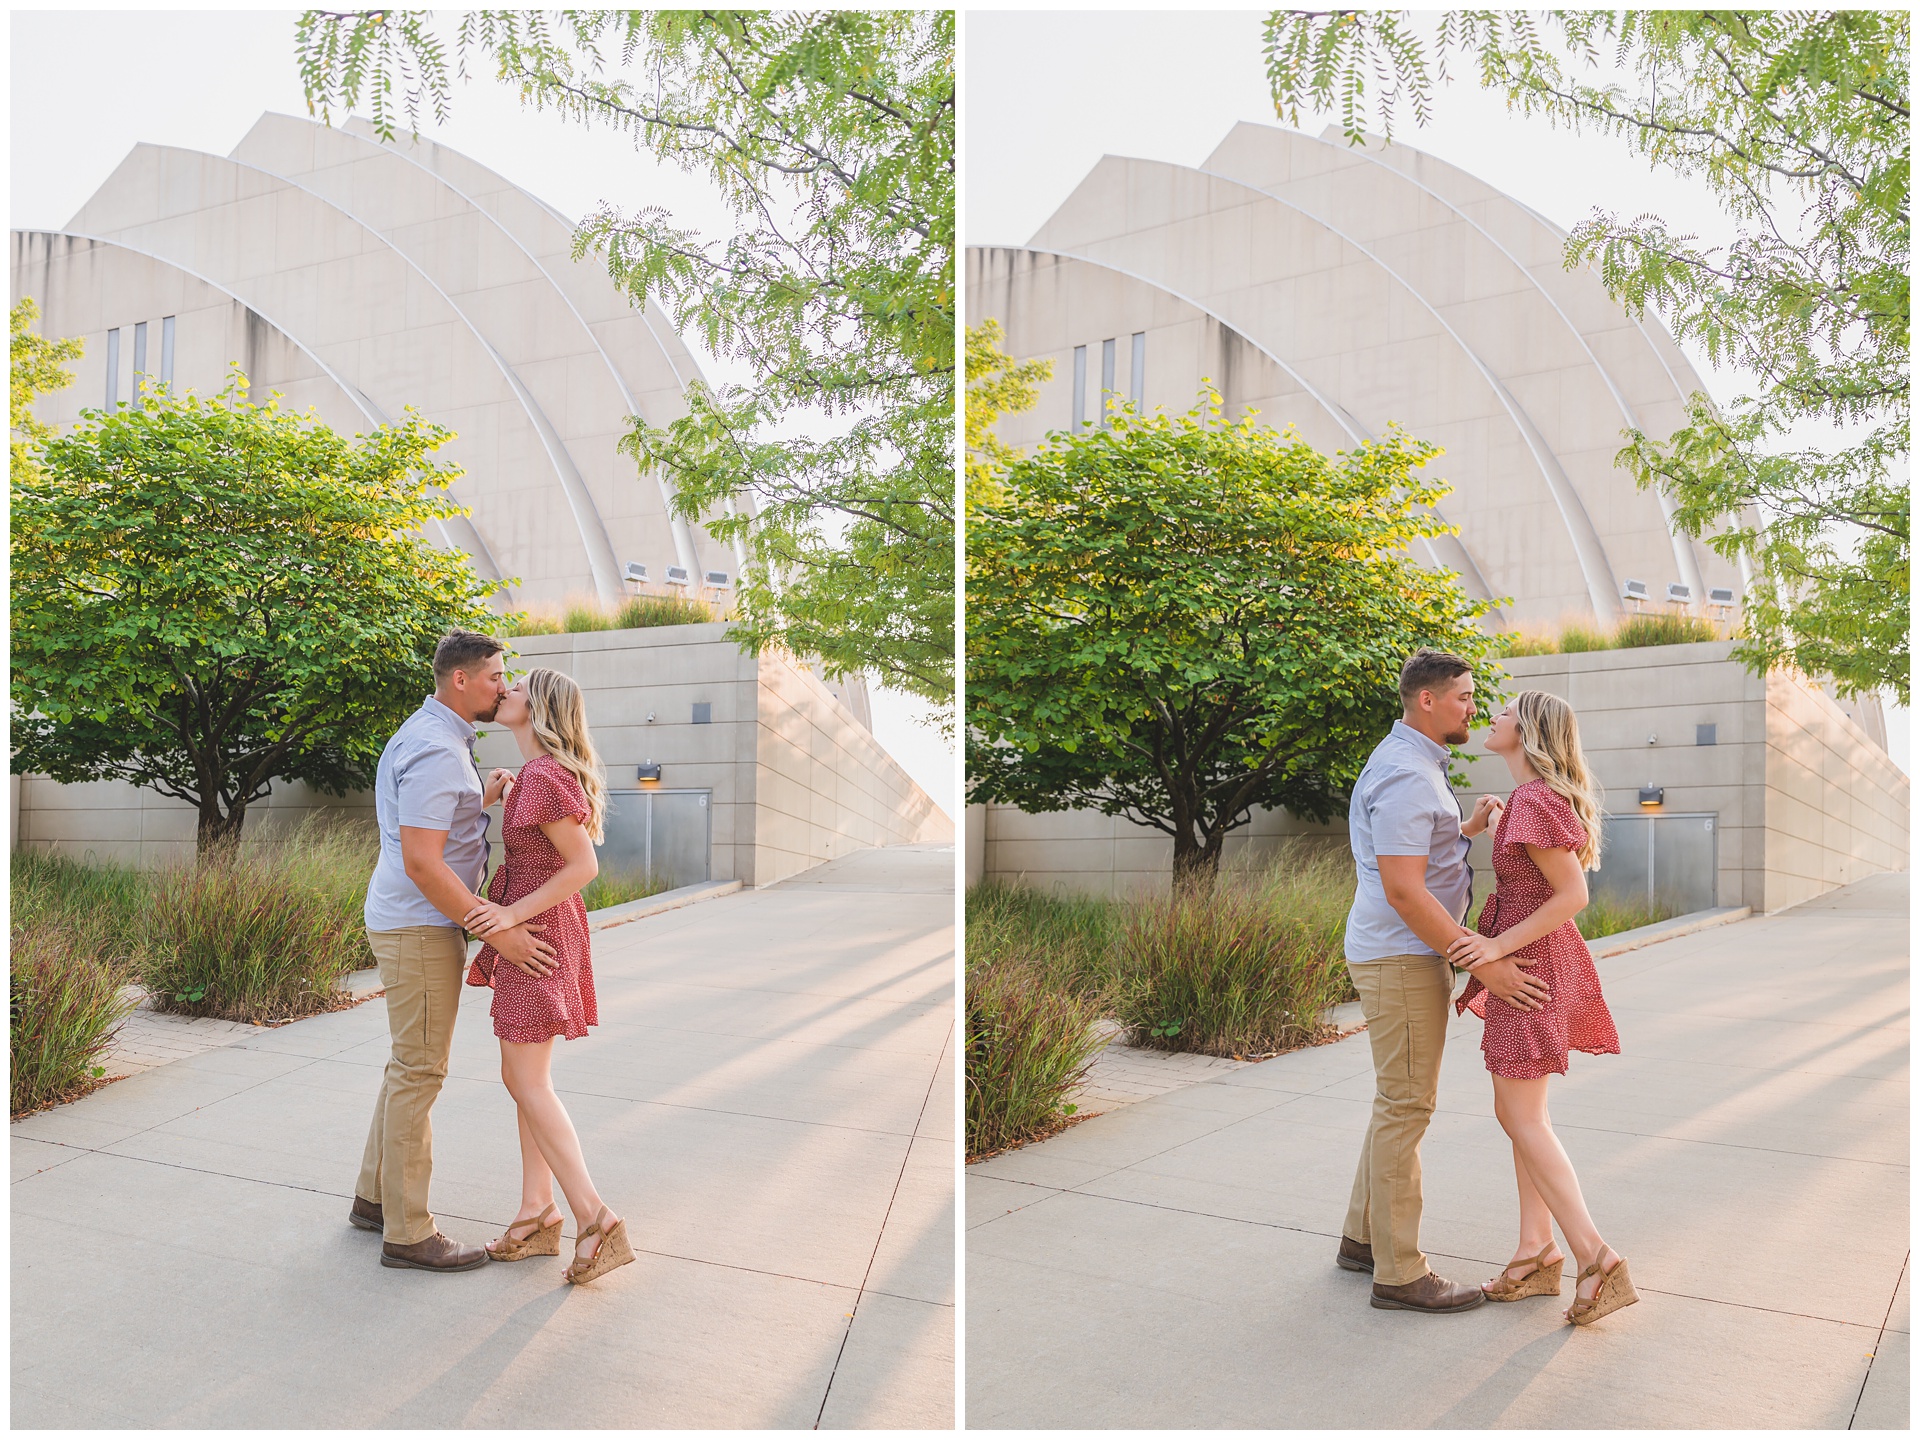 Engagement photography at the Kauffman Center and Penn Valley Park by Kansas City wedding photographers Wisdom-Watson Weddings.